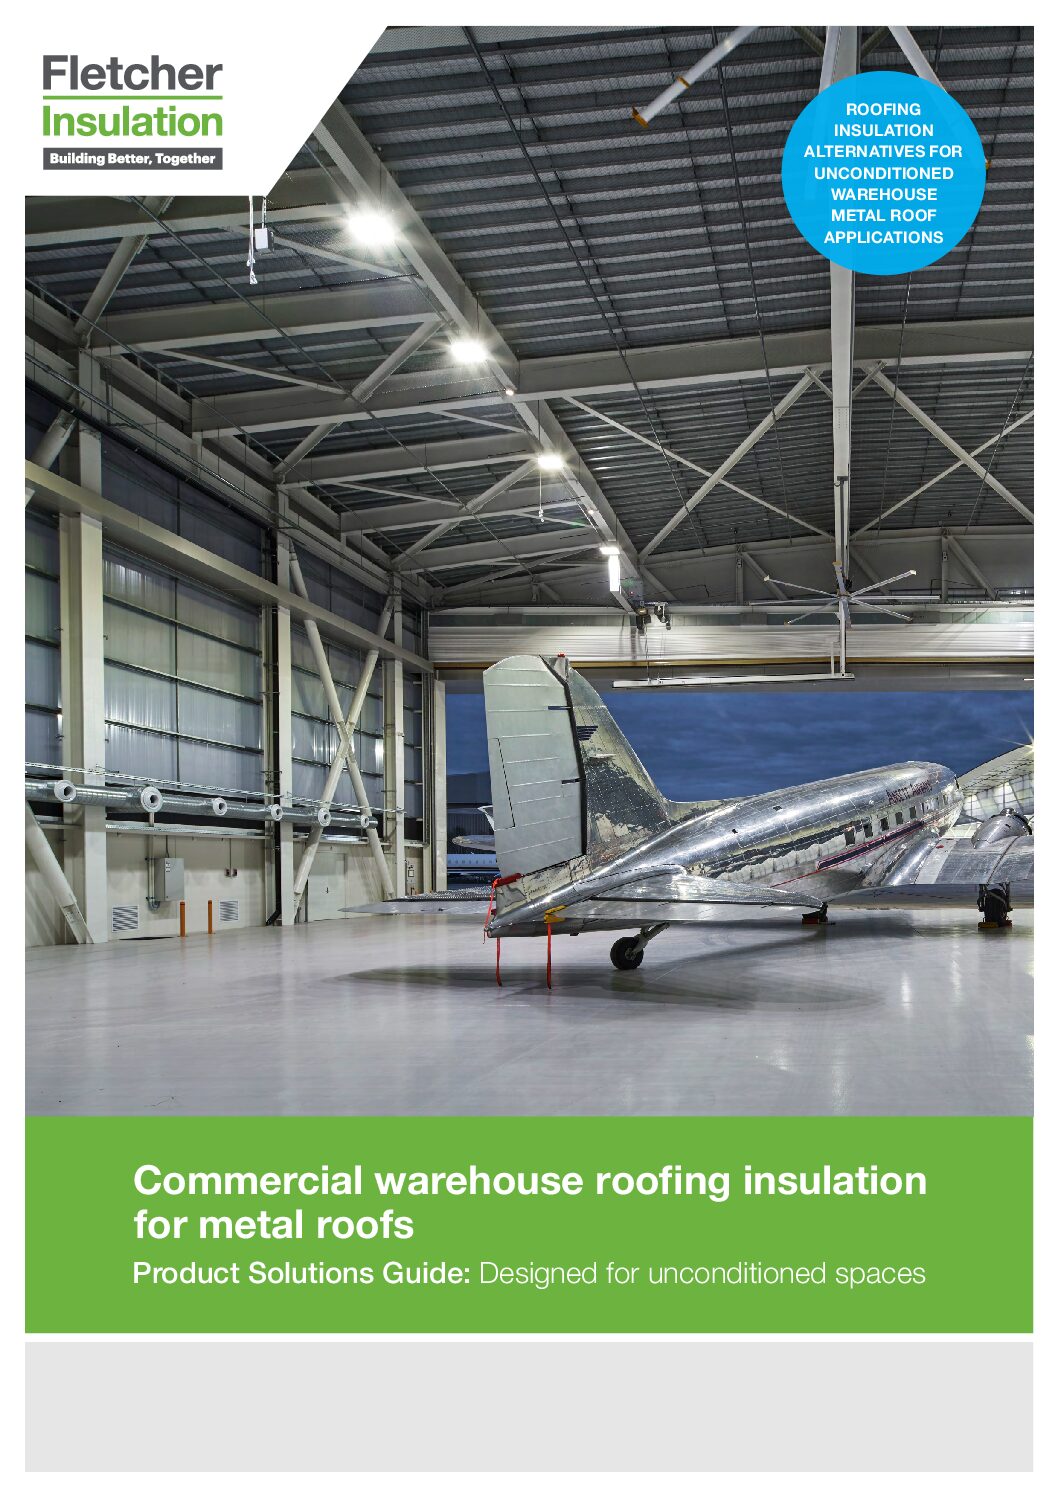 Commercial Warehouse Roofing Insulation for Metal Roofs – Product Solutions Guide: Designed for unconditioned spaces